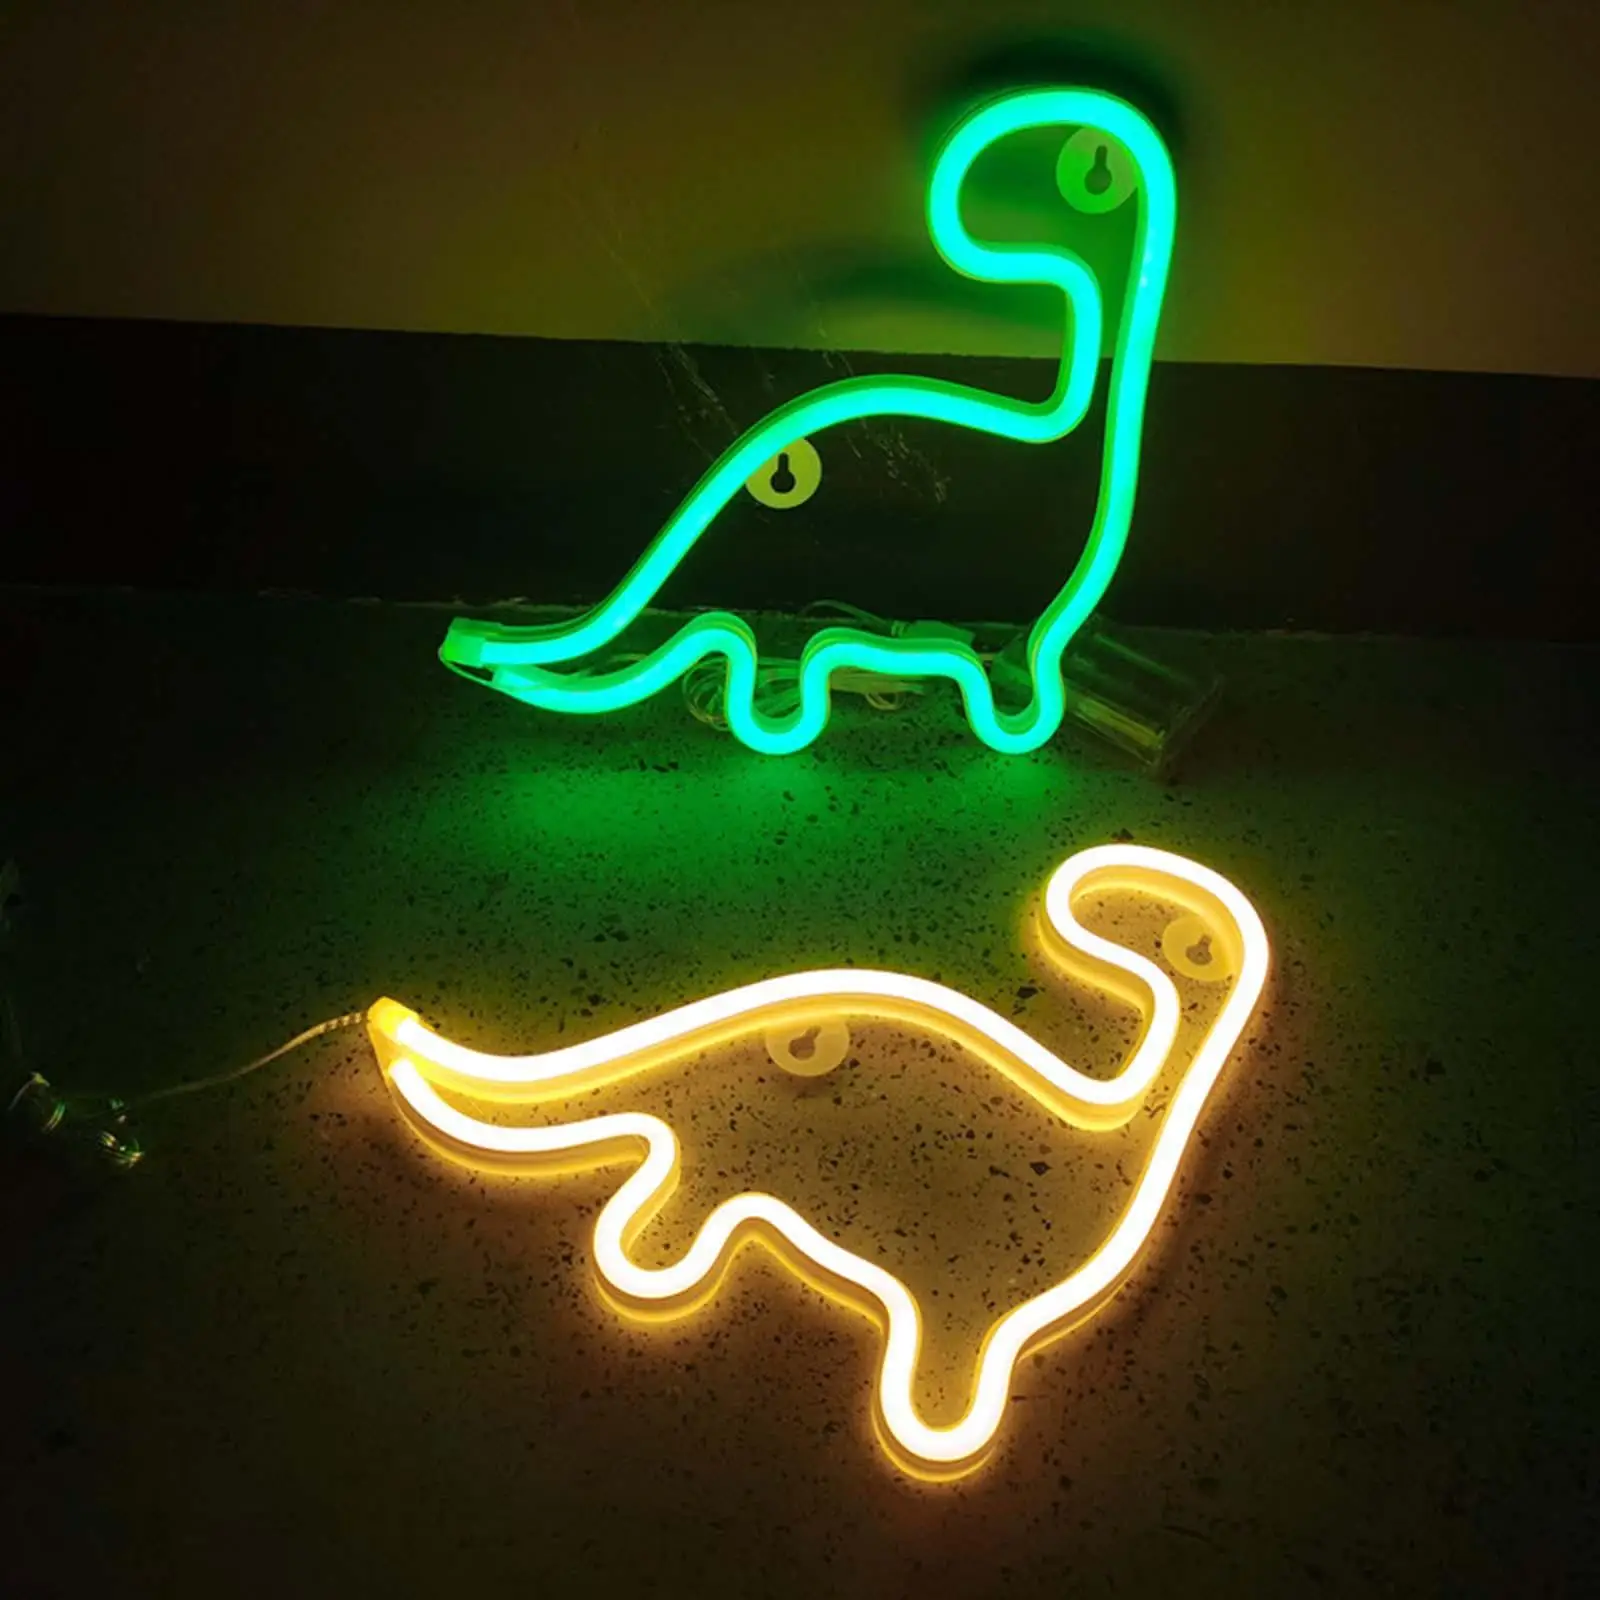 LED Dinosaur Neon Lamp Sign Battery USB Operated Night Light Decorative Lighting for Party Wedding Table Living Room Kids Room